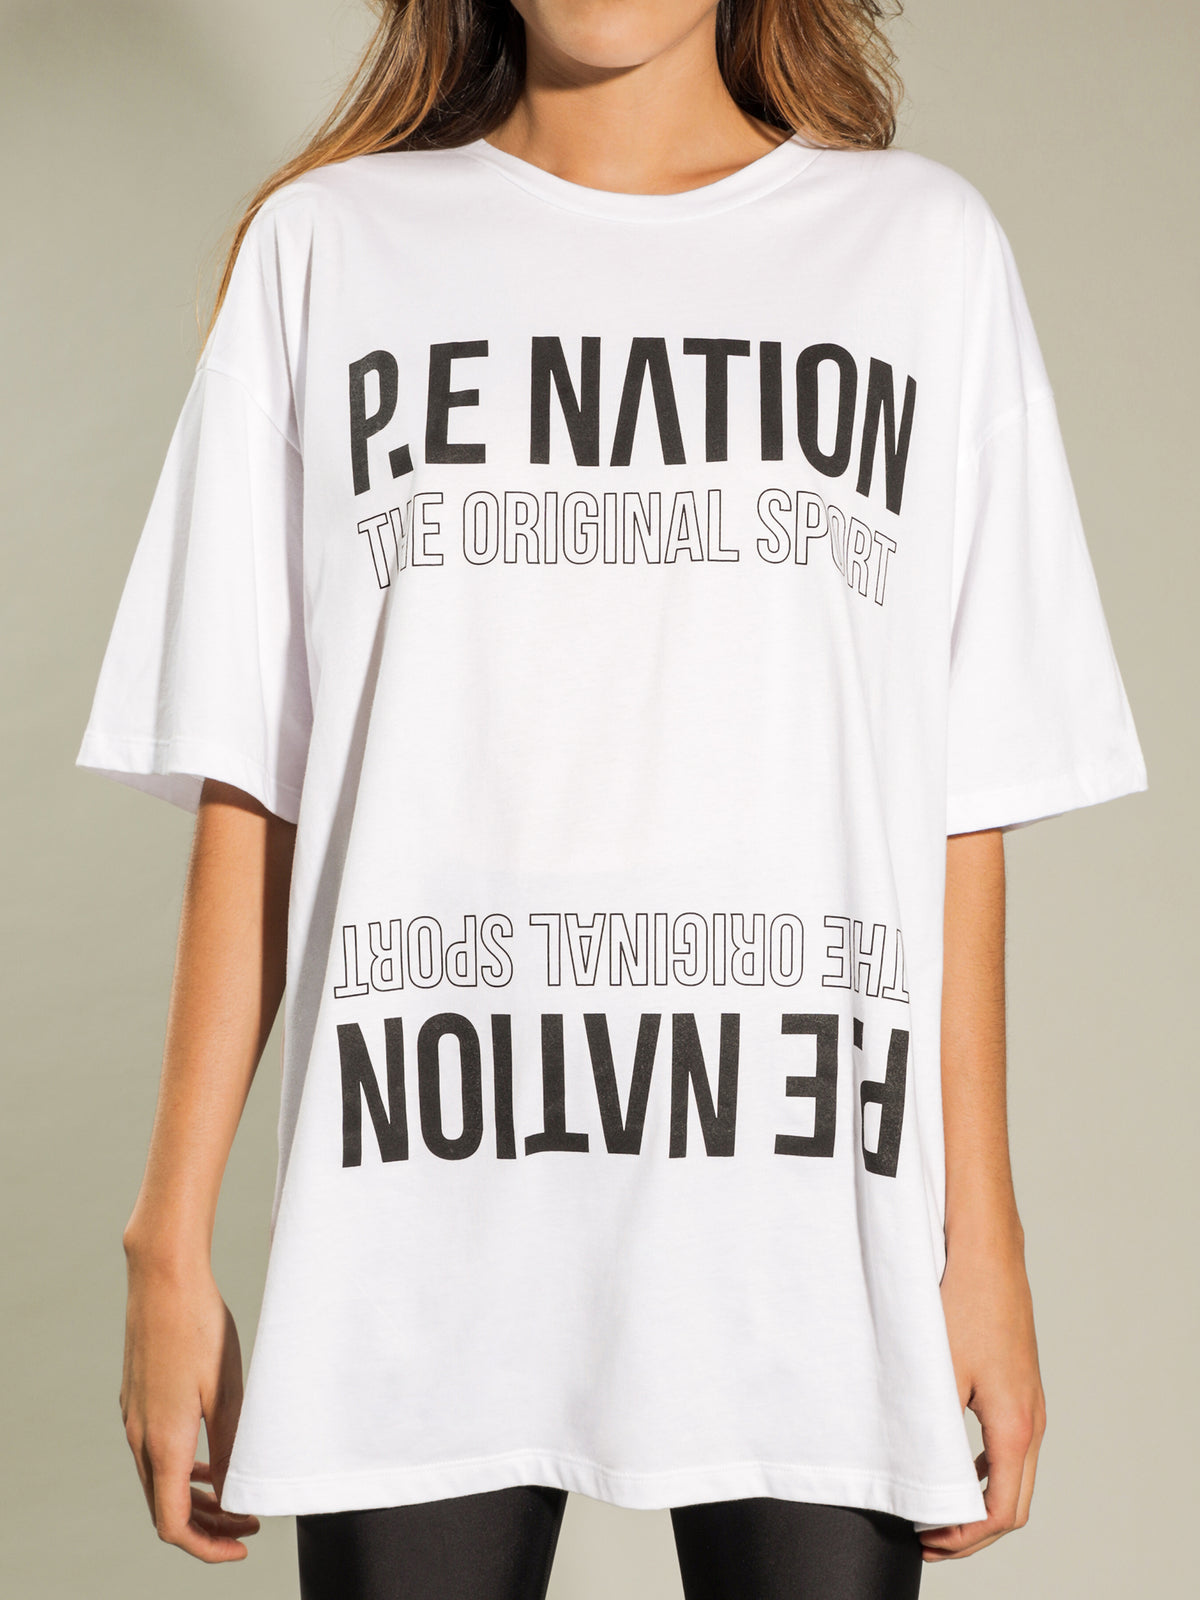 Union T-Shirt in Optic White